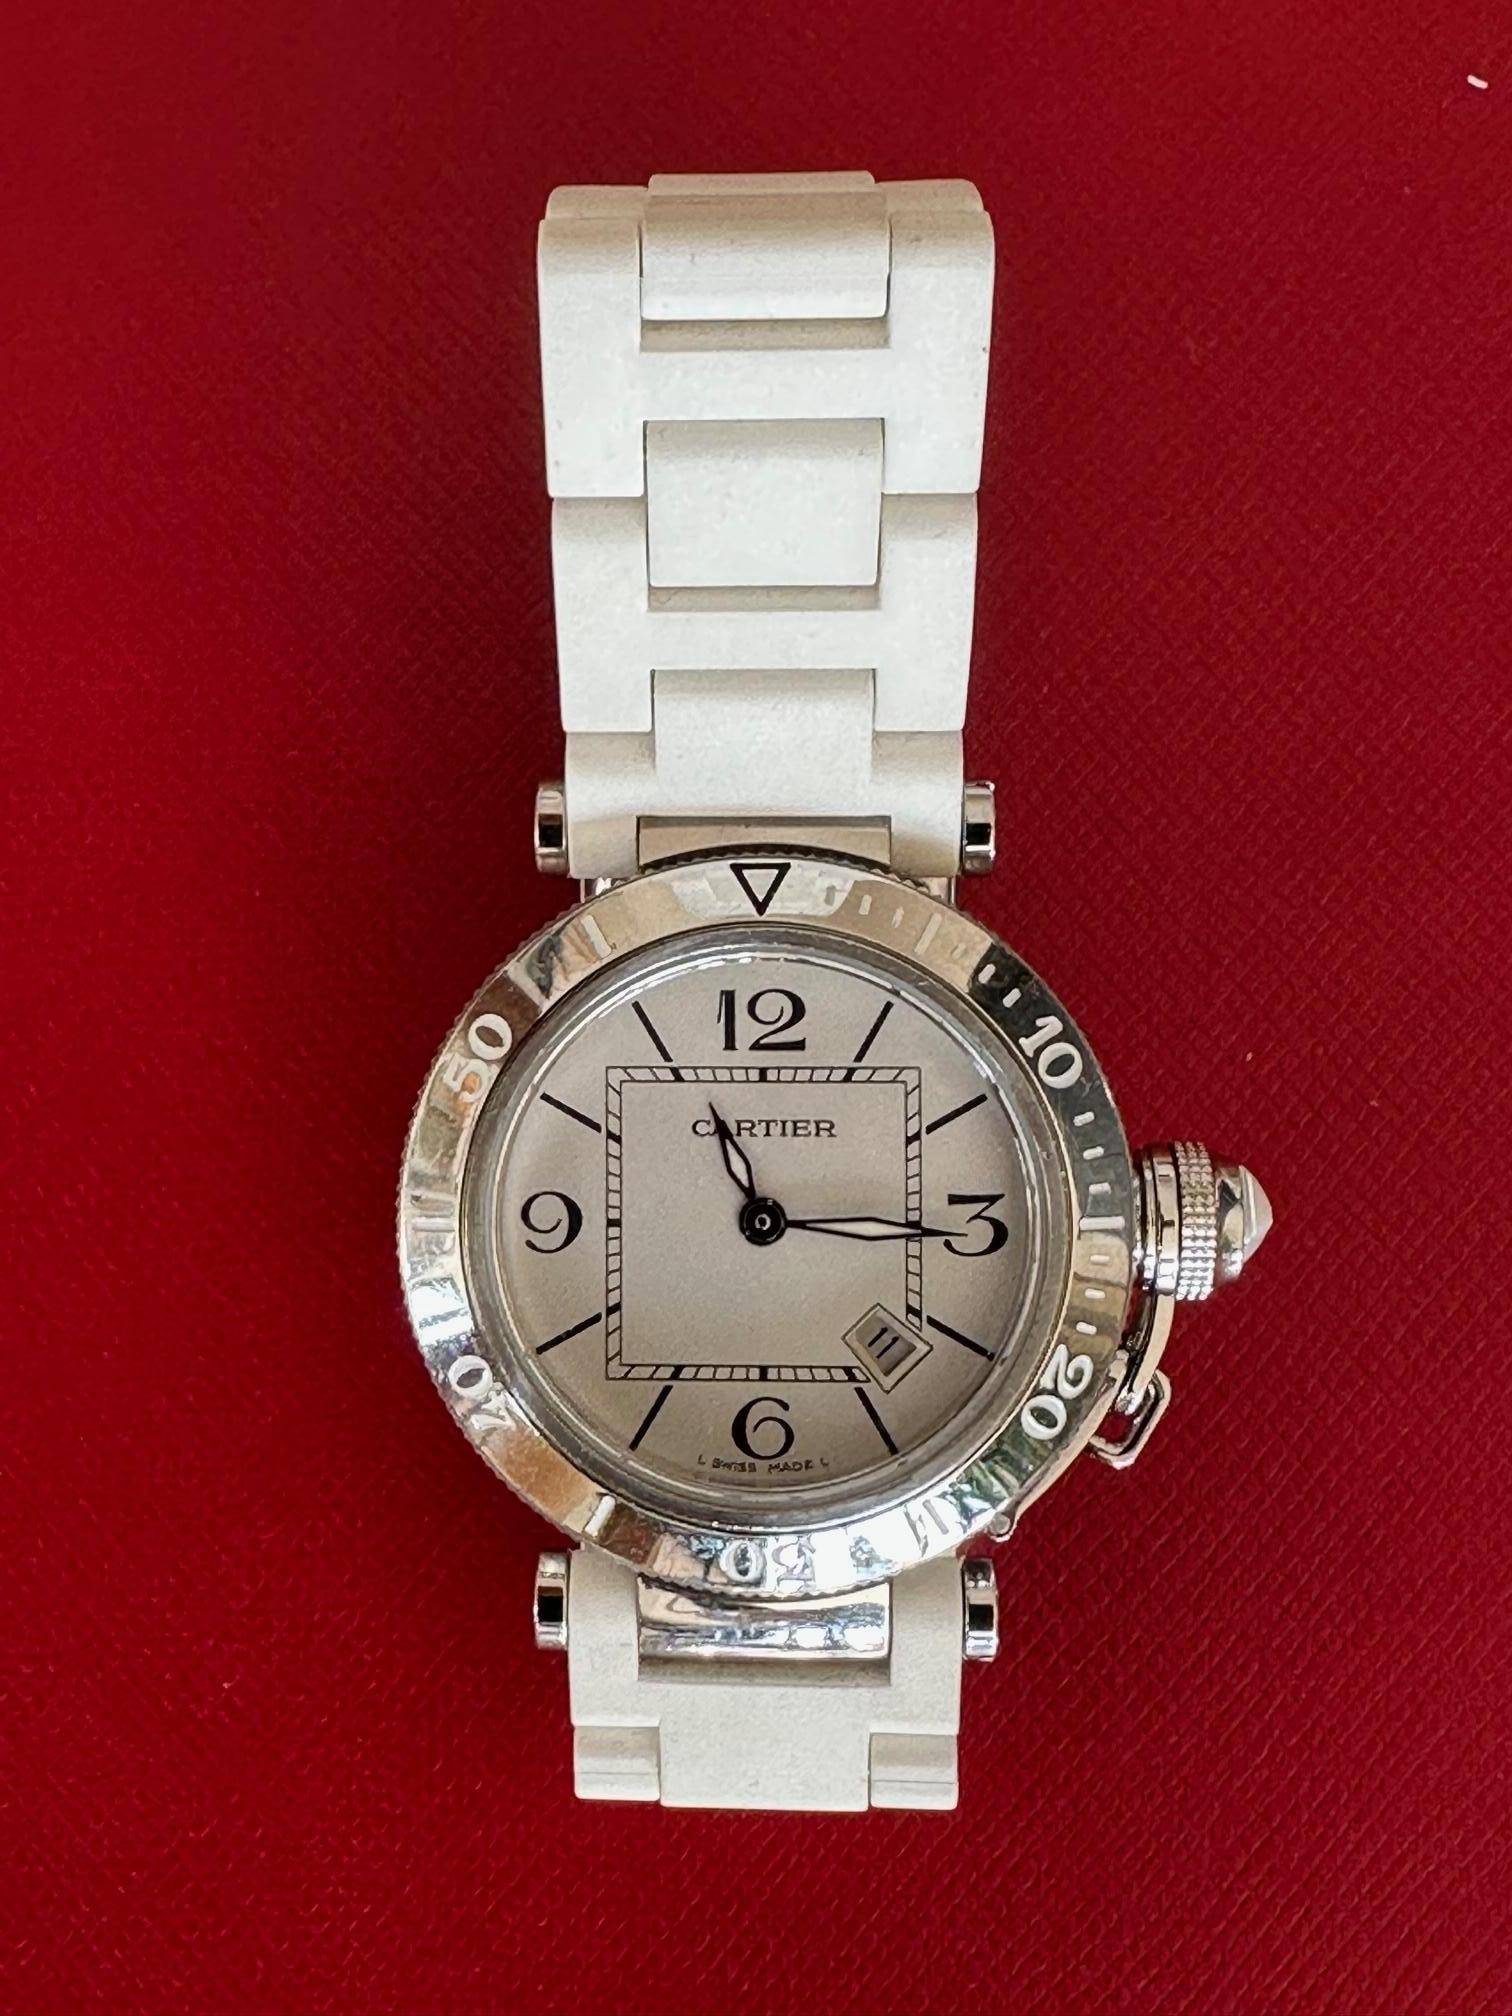 Cartier Pasha Seatimer Lady watch 33 mm W3140002 VPEMNE never worn For Sale 3